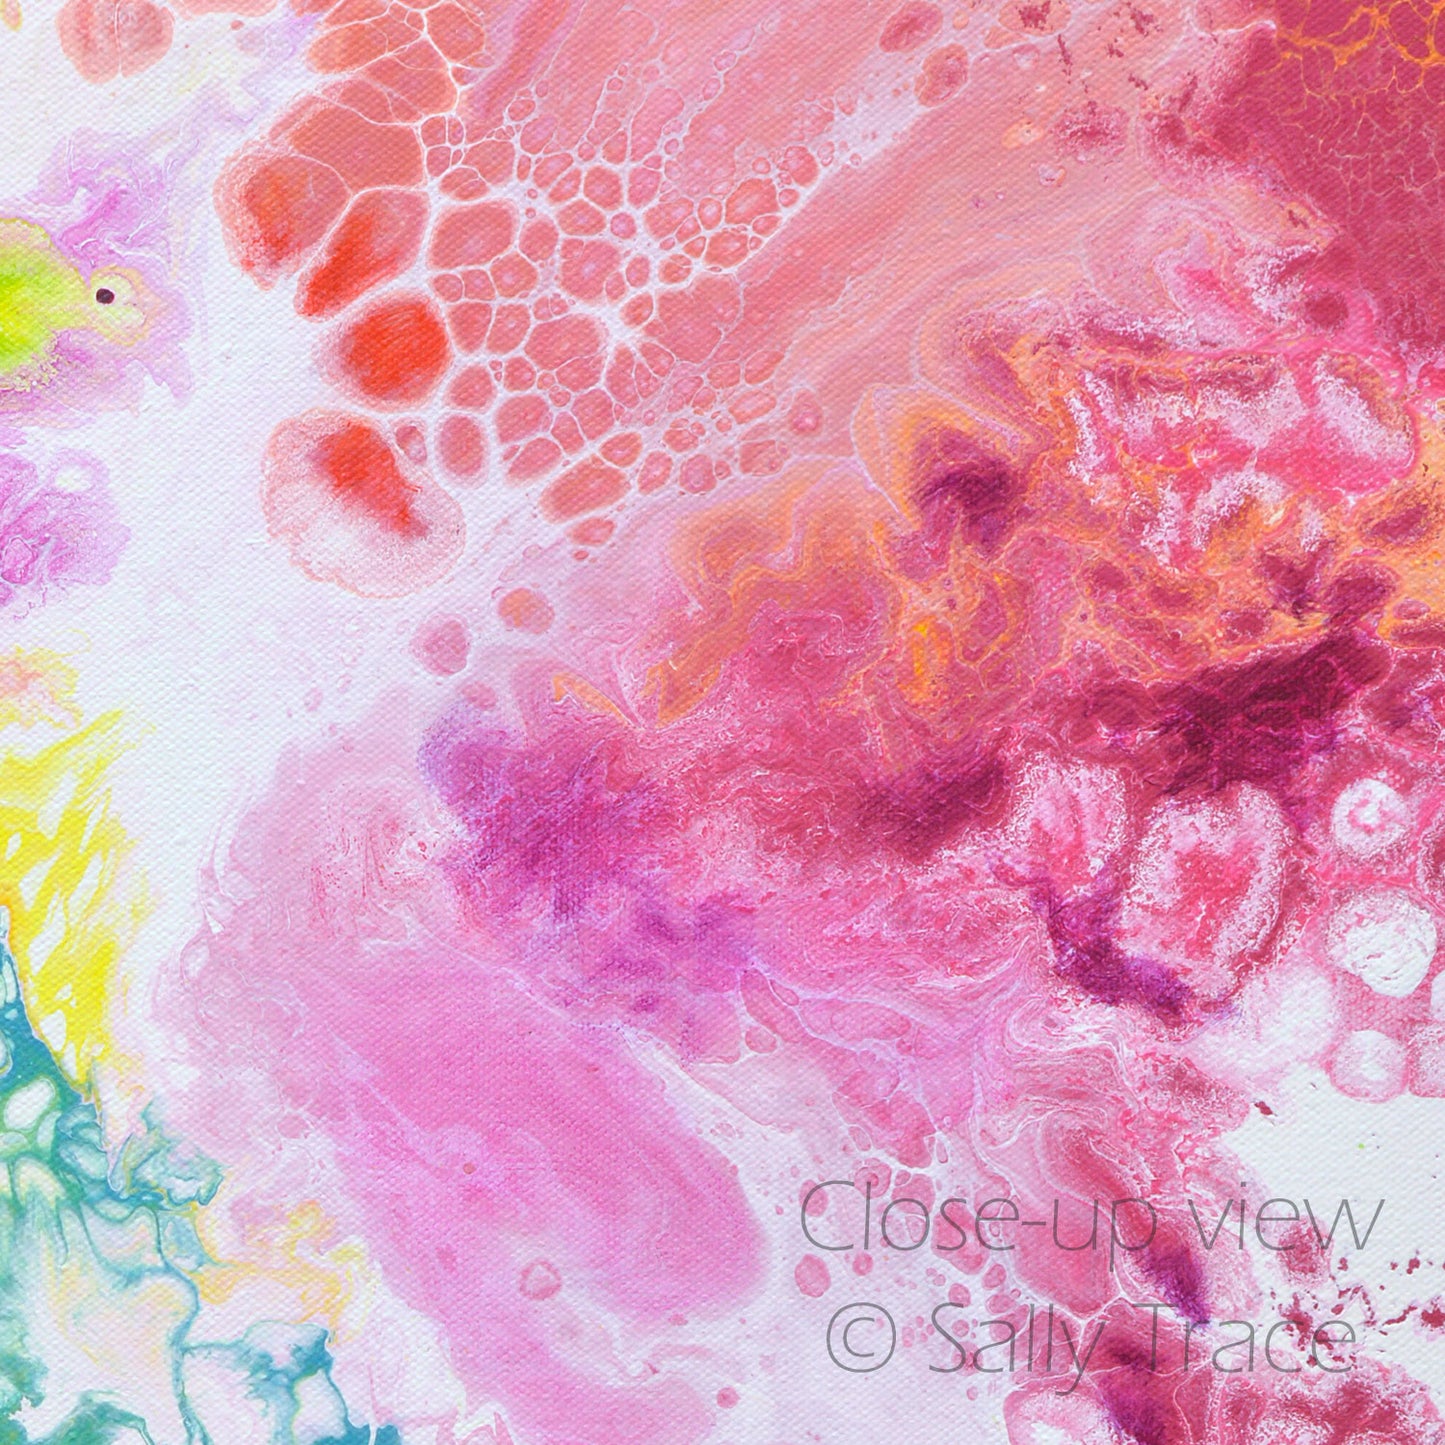 "Coming Alive," Giclee Prints from my Fluid Abstract Painting